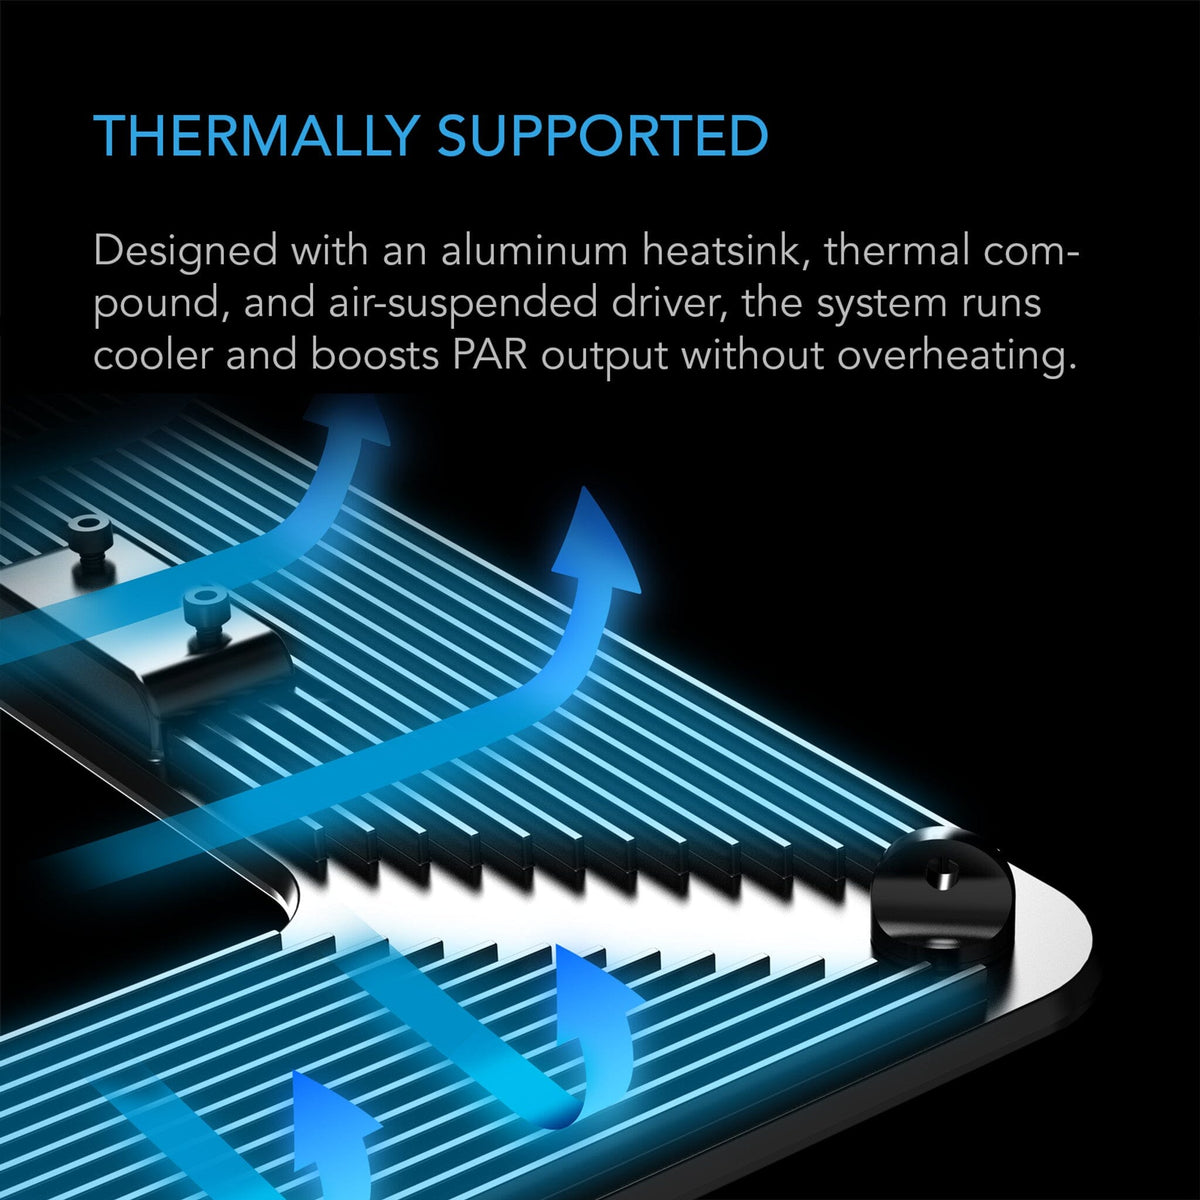 Thermally Supported heatsink